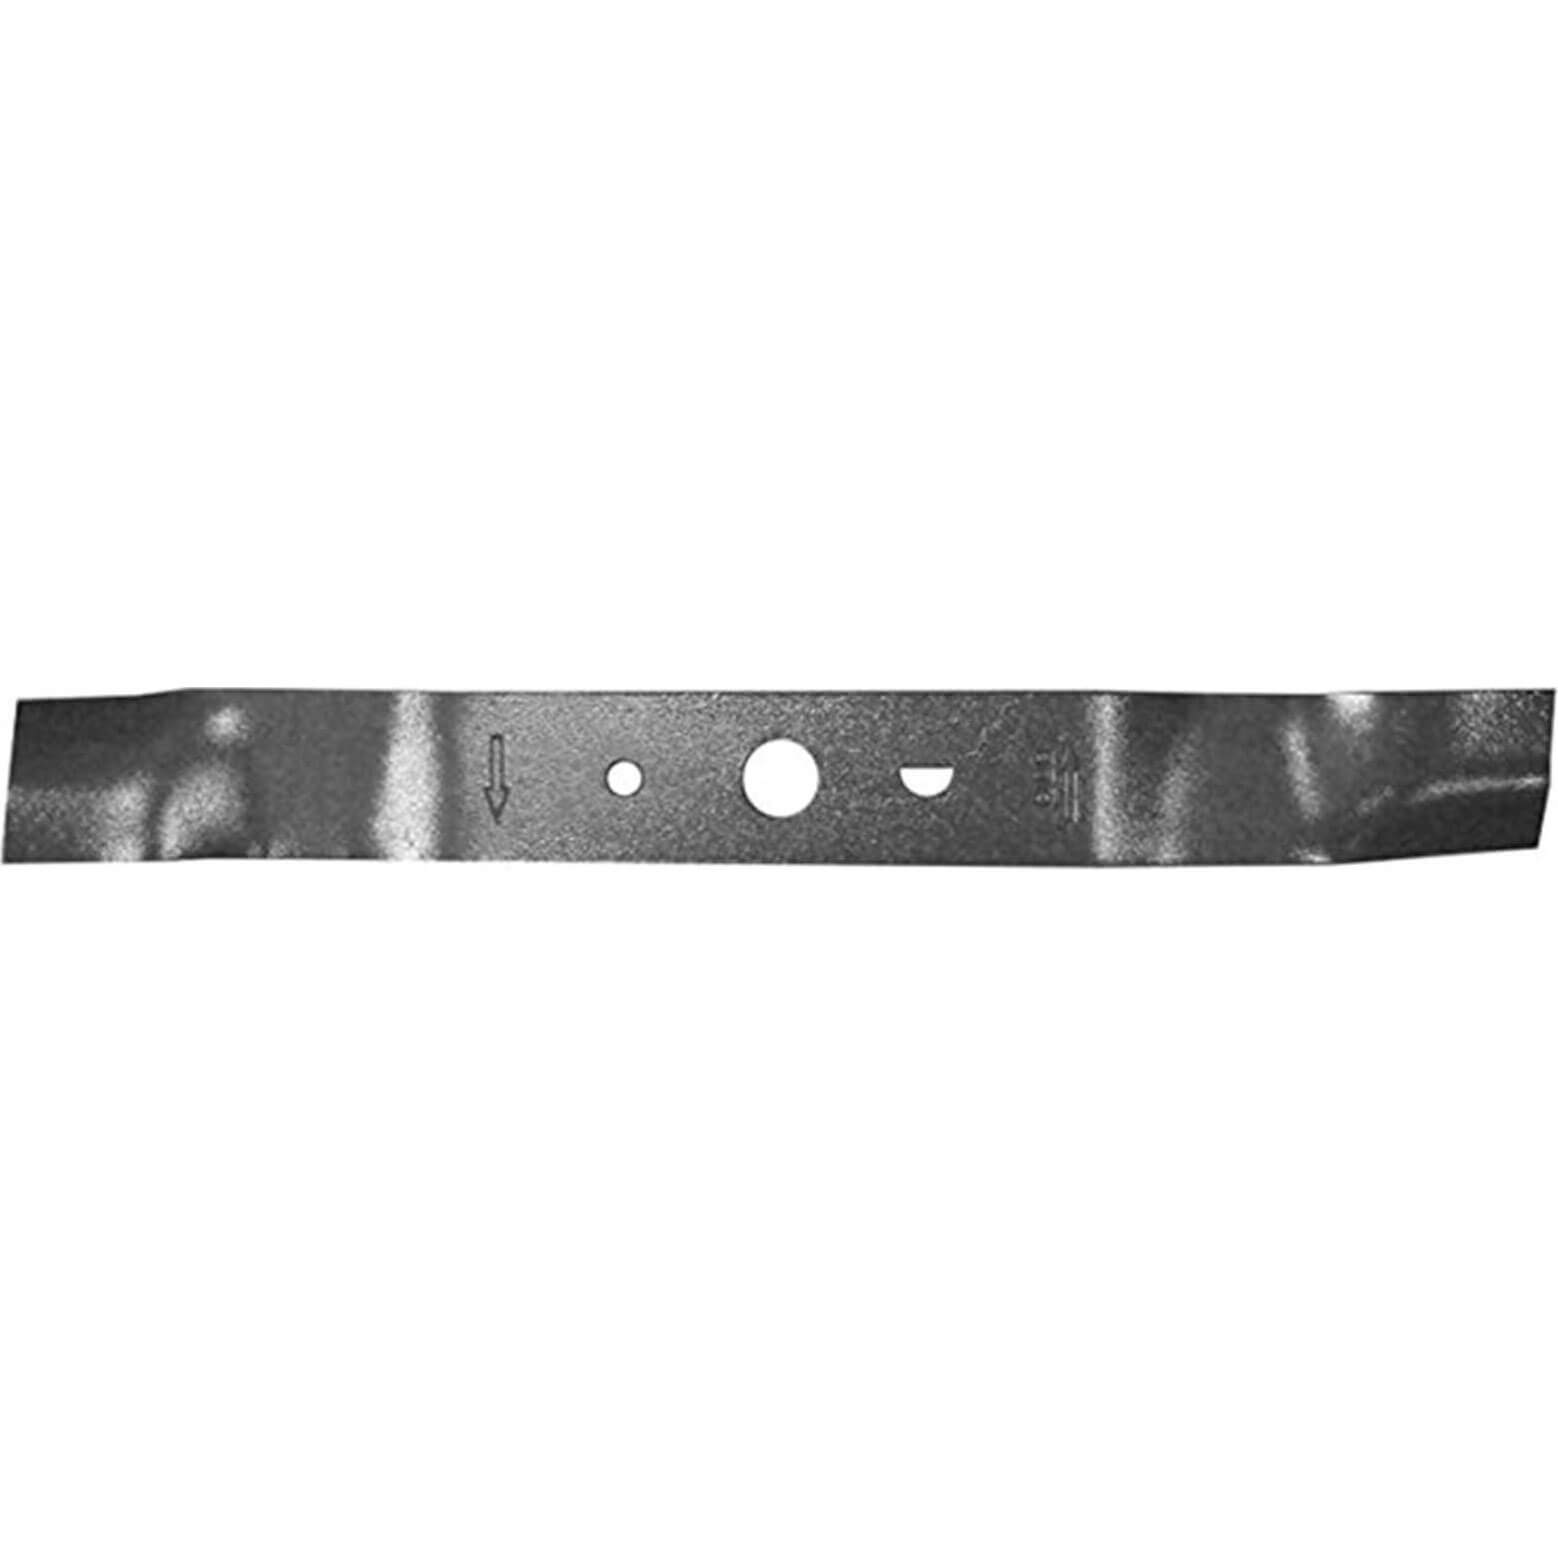 Image of Greenworks Genuine Lawnmower Blade for G40LM35 Pack of 1